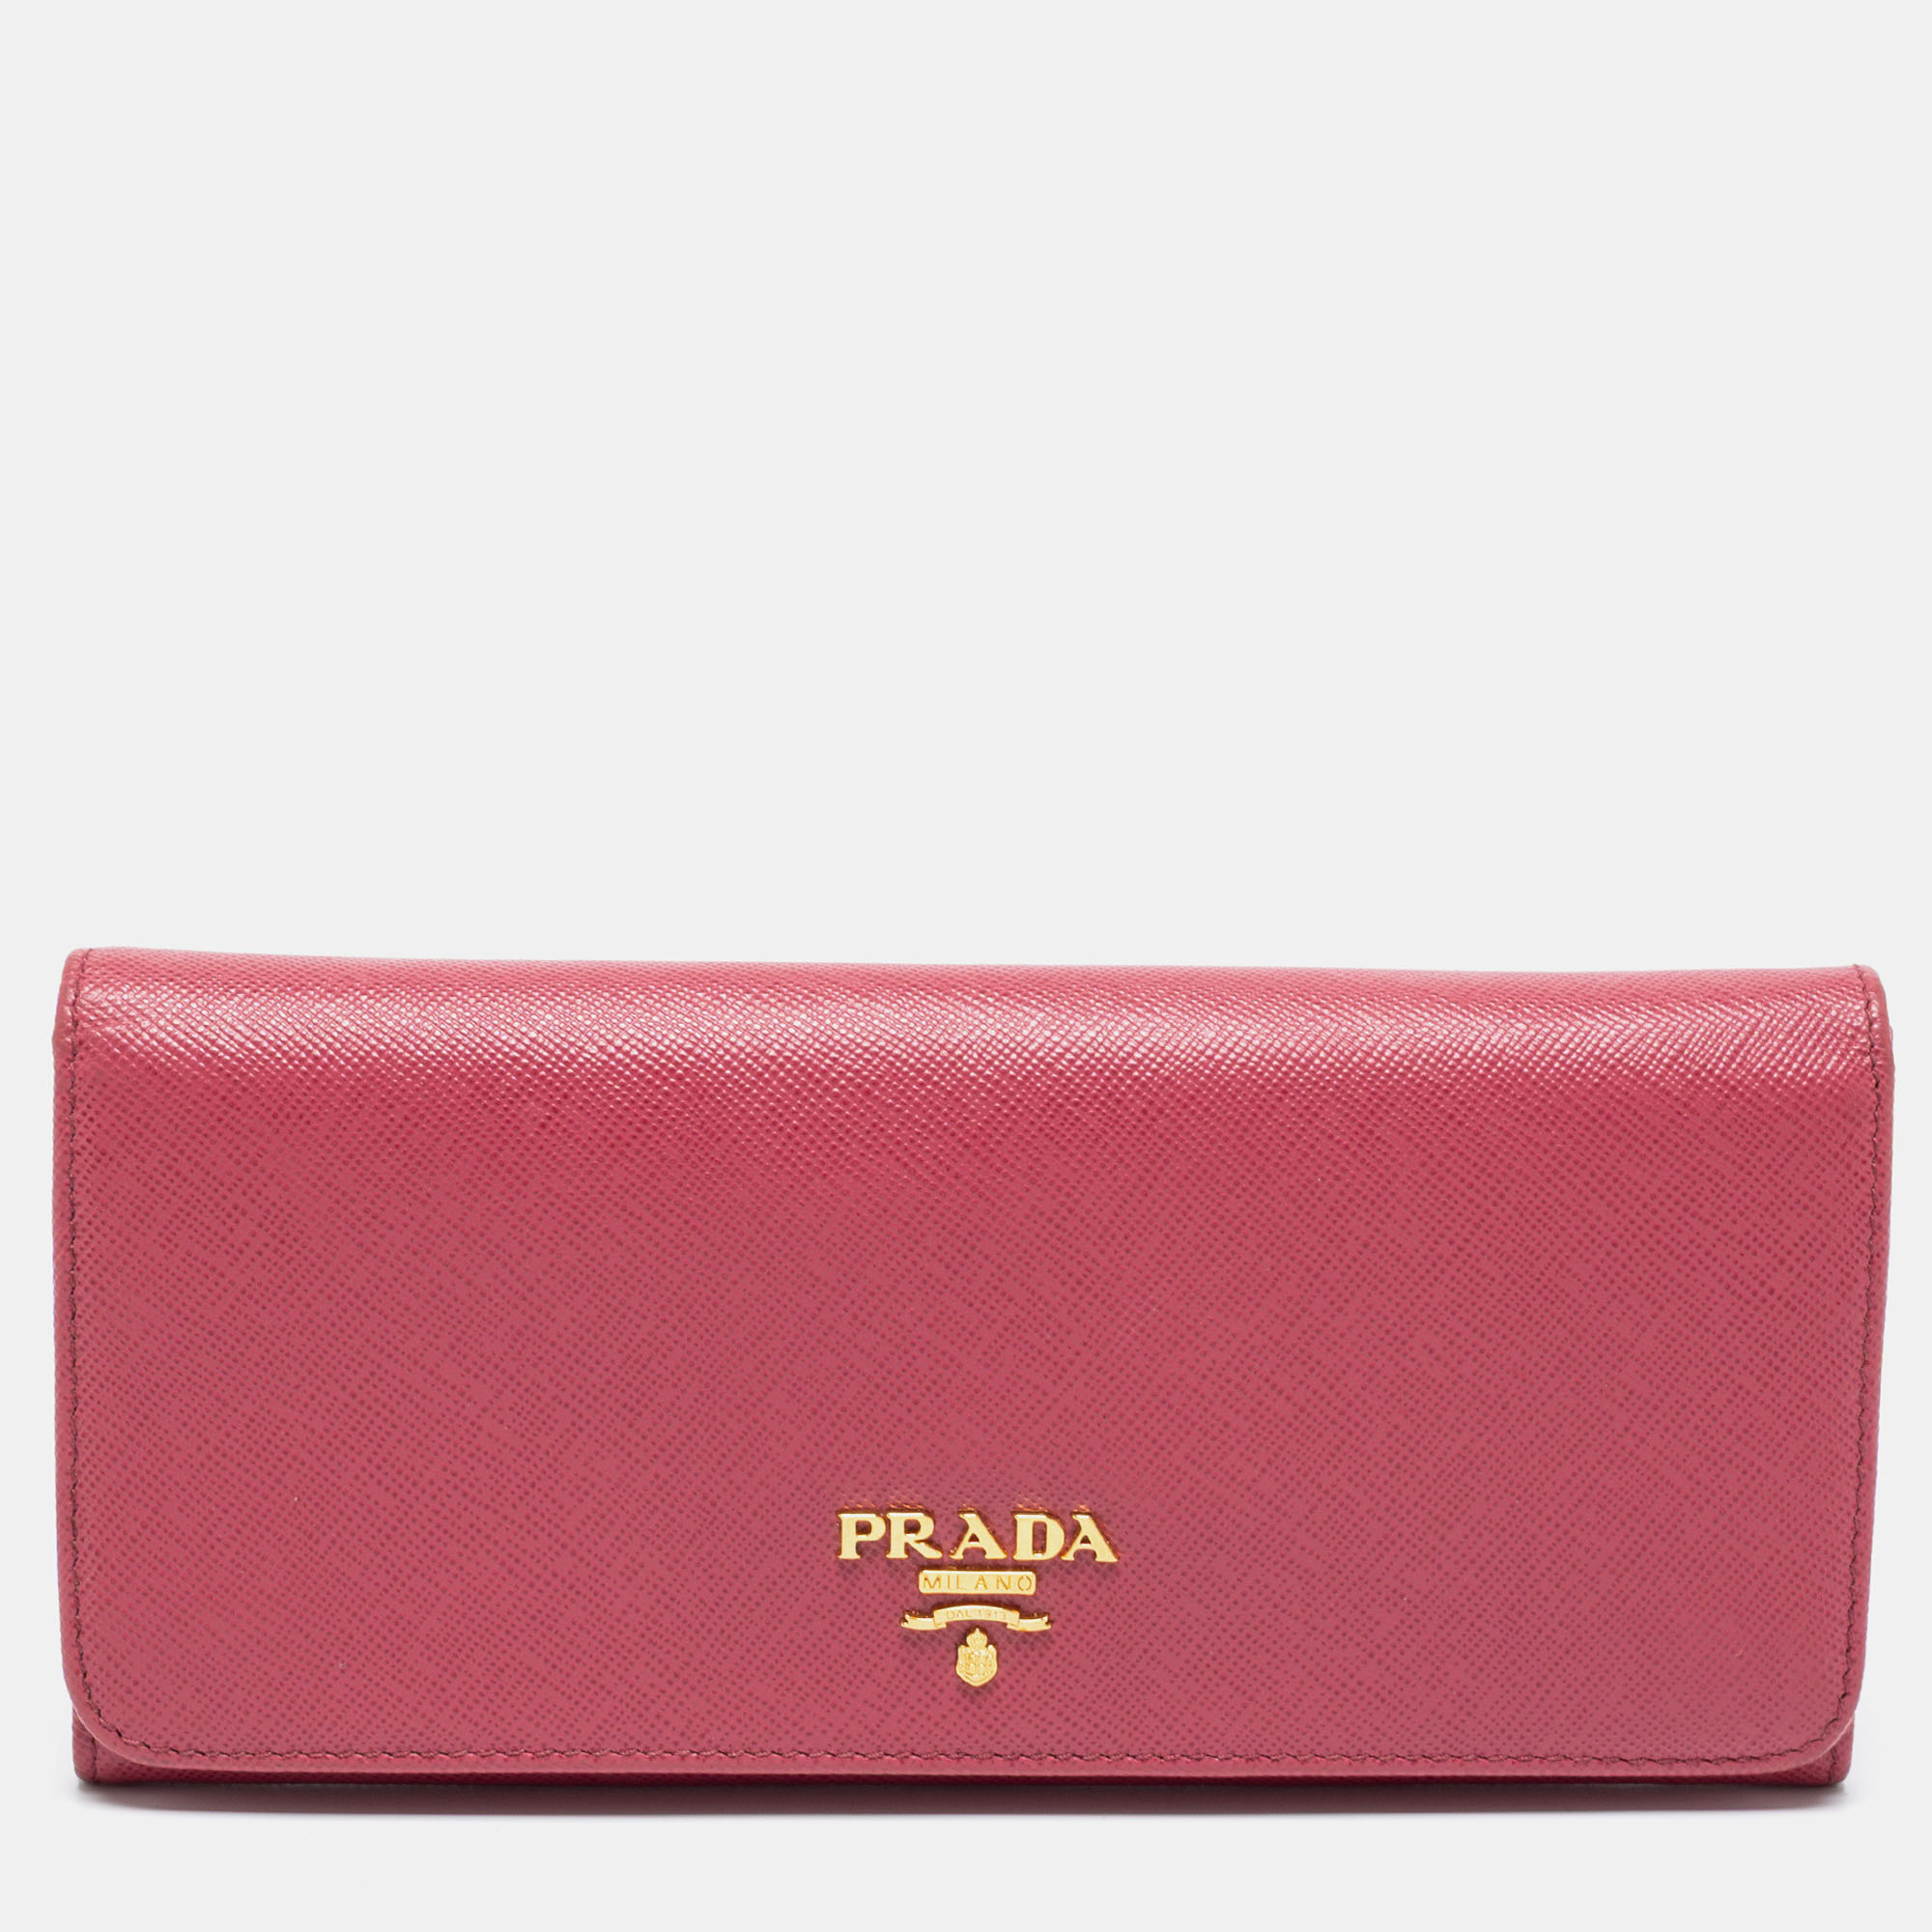 Prada Pink Saffiano Leather Continental Flap Wallet